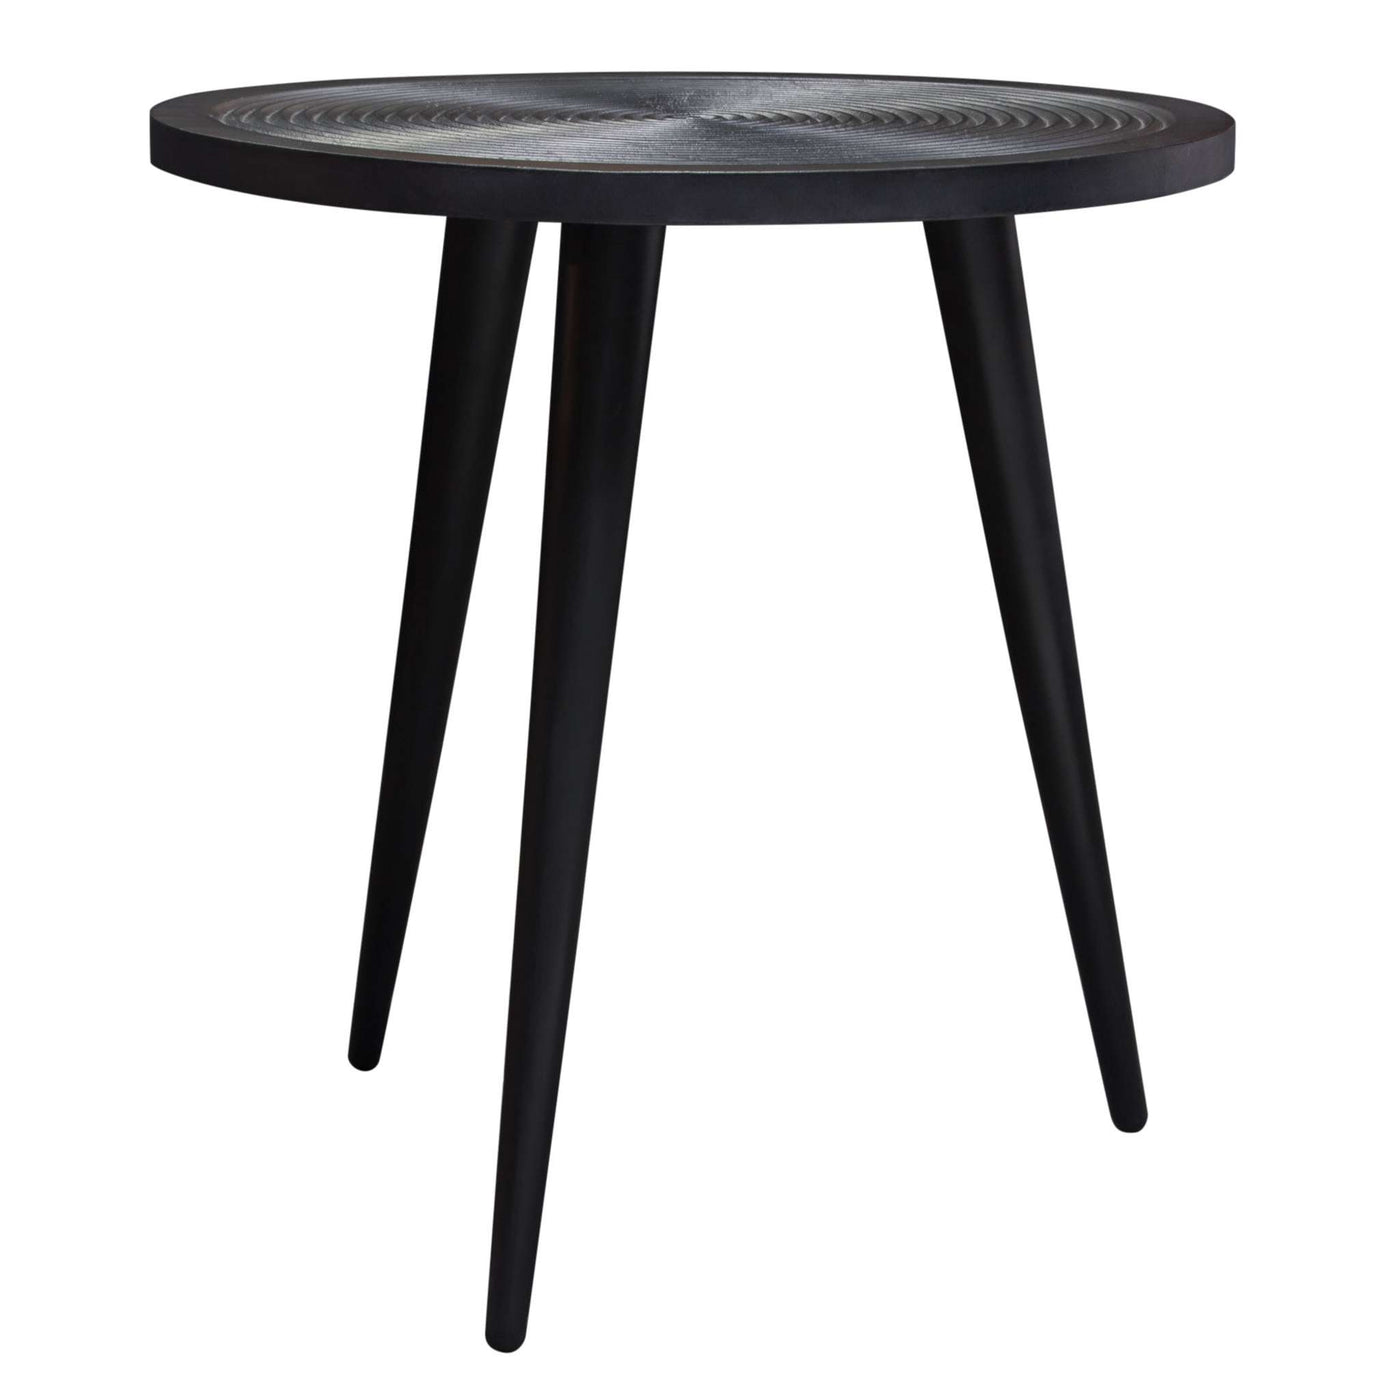 Vortex Table in Solid Mango Wood Top in Black Finish & Iron Legs by Diamond Sofa